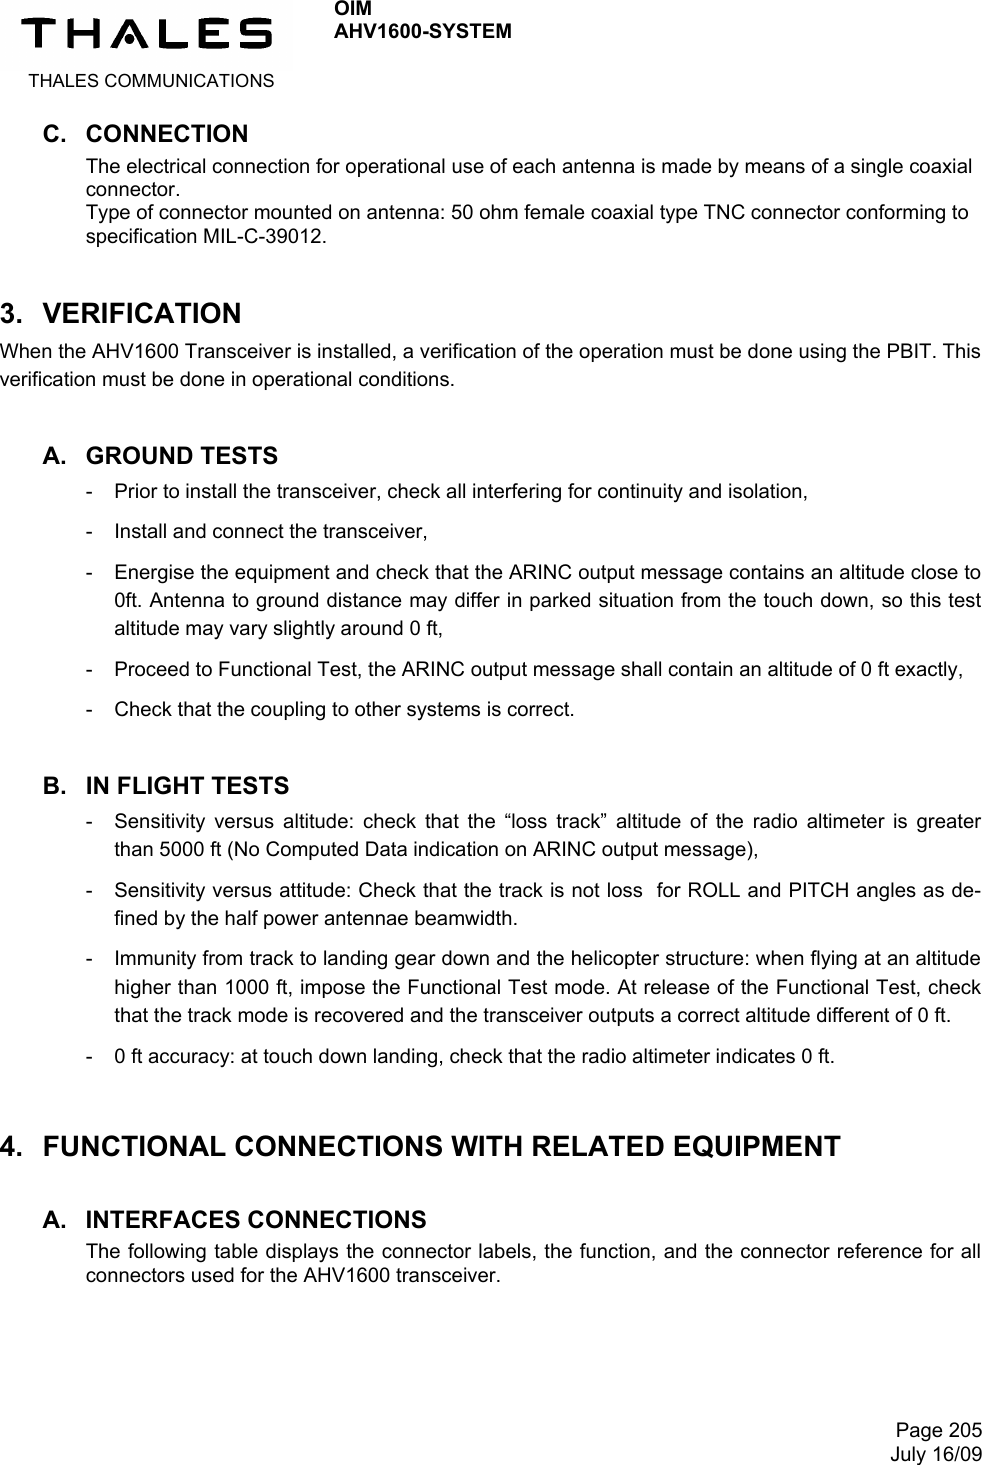  THALES COMMUNICATIONS OIM AHV1600-SYSTEM     Page 205July 16/09 C. CONNECTION The electrical connection for operational use of each antenna is made by means of a single coaxial connector. Type of connector mounted on antenna: 50 ohm female coaxial type TNC connector conforming to specification MIL-C-39012. 3. VERIFICATION When the AHV1600 Transceiver is installed, a verification of the operation must be done using the PBIT. This verification must be done in operational conditions. A. GROUND TESTS -  Prior to install the transceiver, check all interfering for continuity and isolation, -  Install and connect the transceiver, -  Energise the equipment and check that the ARINC output message contains an altitude close to 0ft. Antenna to ground distance may differ in parked situation from the touch down, so this test altitude may vary slightly around 0 ft, -  Proceed to Functional Test, the ARINC output message shall contain an altitude of 0 ft exactly, -  Check that the coupling to other systems is correct. B. IN FLIGHT TESTS -  Sensitivity versus altitude: check that the “loss track” altitude of the radio altimeter is greater than 5000 ft (No Computed Data indication on ARINC output message), -  Sensitivity versus attitude: Check that the track is not loss  for ROLL and PITCH angles as de-fined by the half power antennae beamwidth. -  Immunity from track to landing gear down and the helicopter structure: when flying at an altitude higher than 1000 ft, impose the Functional Test mode. At release of the Functional Test, check that the track mode is recovered and the transceiver outputs a correct altitude different of 0 ft. -  0 ft accuracy: at touch down landing, check that the radio altimeter indicates 0 ft. 4.  FUNCTIONAL CONNECTIONS WITH RELATED EQUIPMENT A. INTERFACES CONNECTIONS The following table displays the connector labels, the function, and the connector reference for all connectors used for the AHV1600 transceiver.   